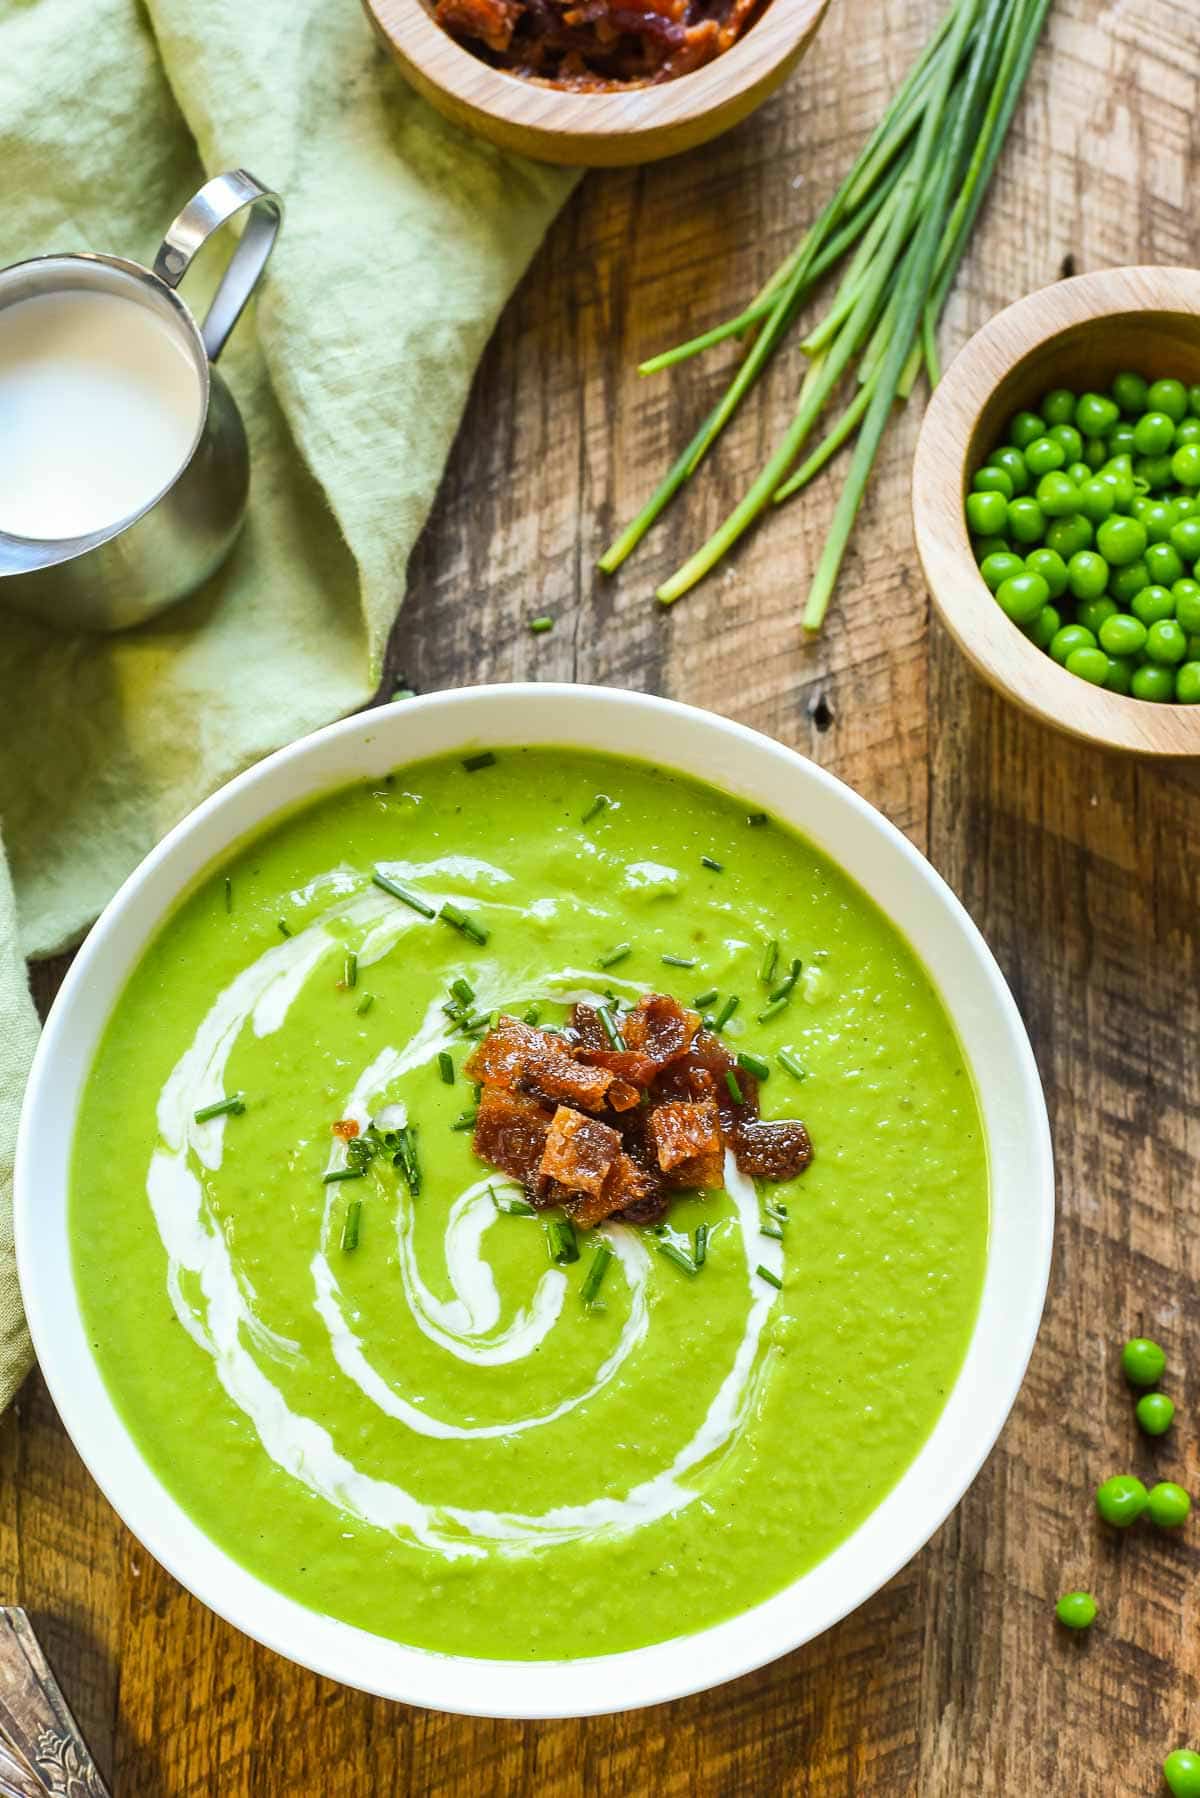 Green Pea Soup with Candied Bacon is a light, creamy soup that absolutely screams spring. It's perfect for Easter or spring brunches!